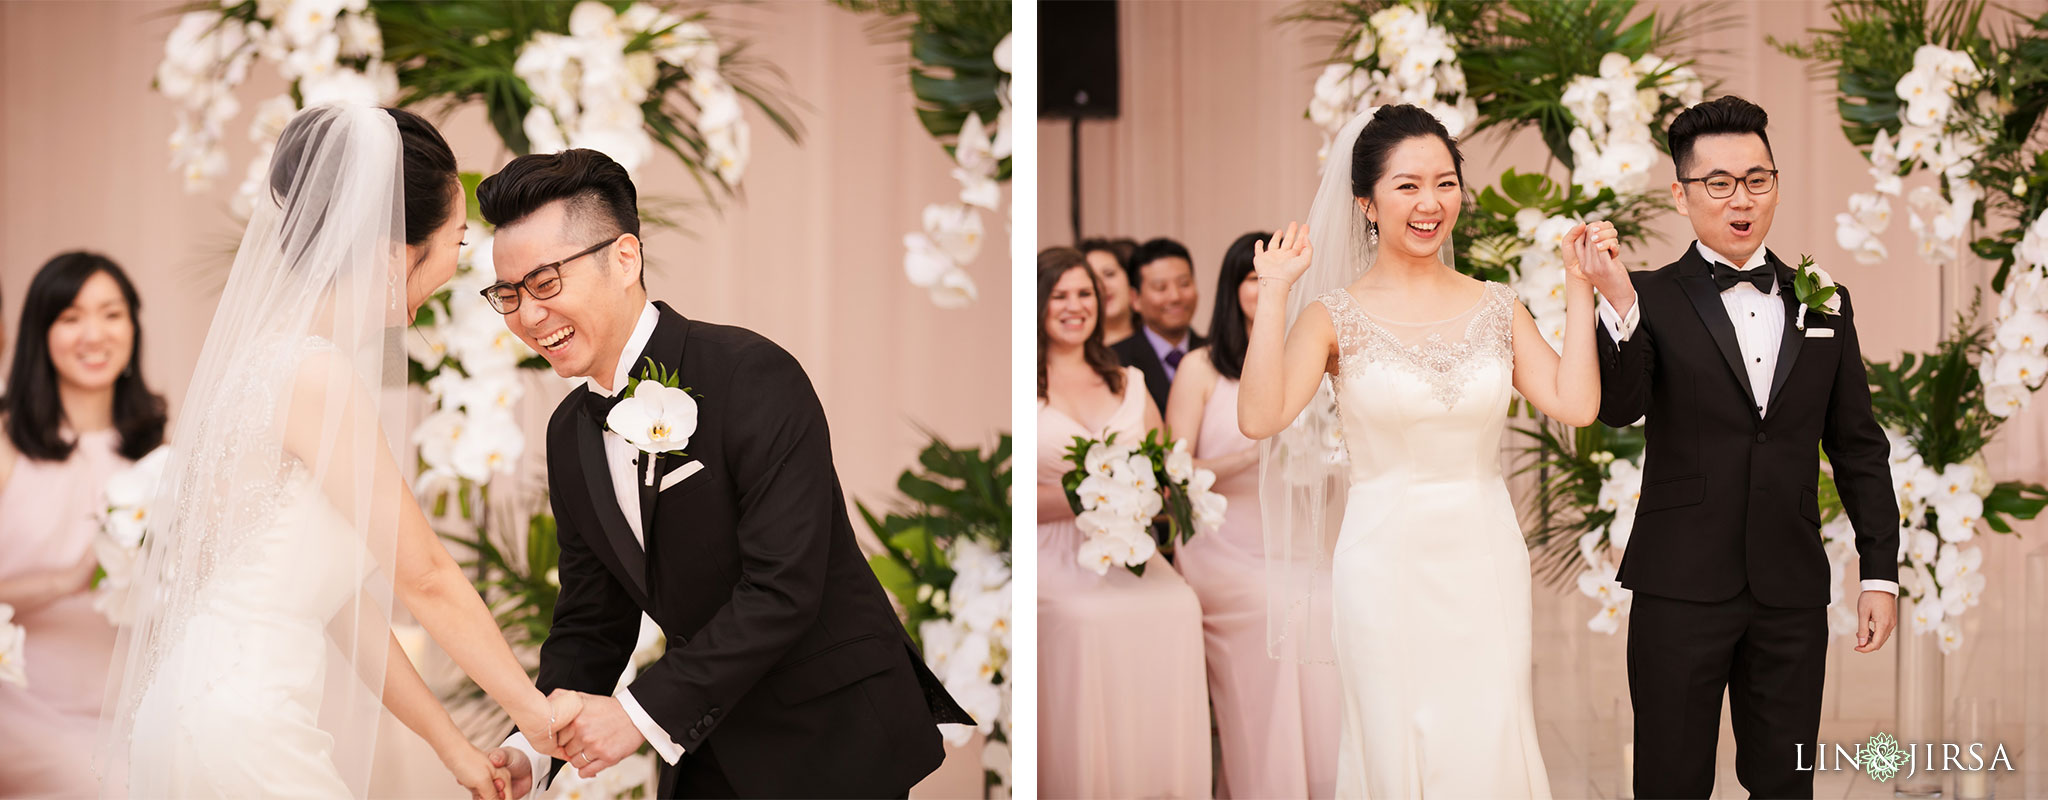 27 segerstrom center for the arts costa mesa wedding photography